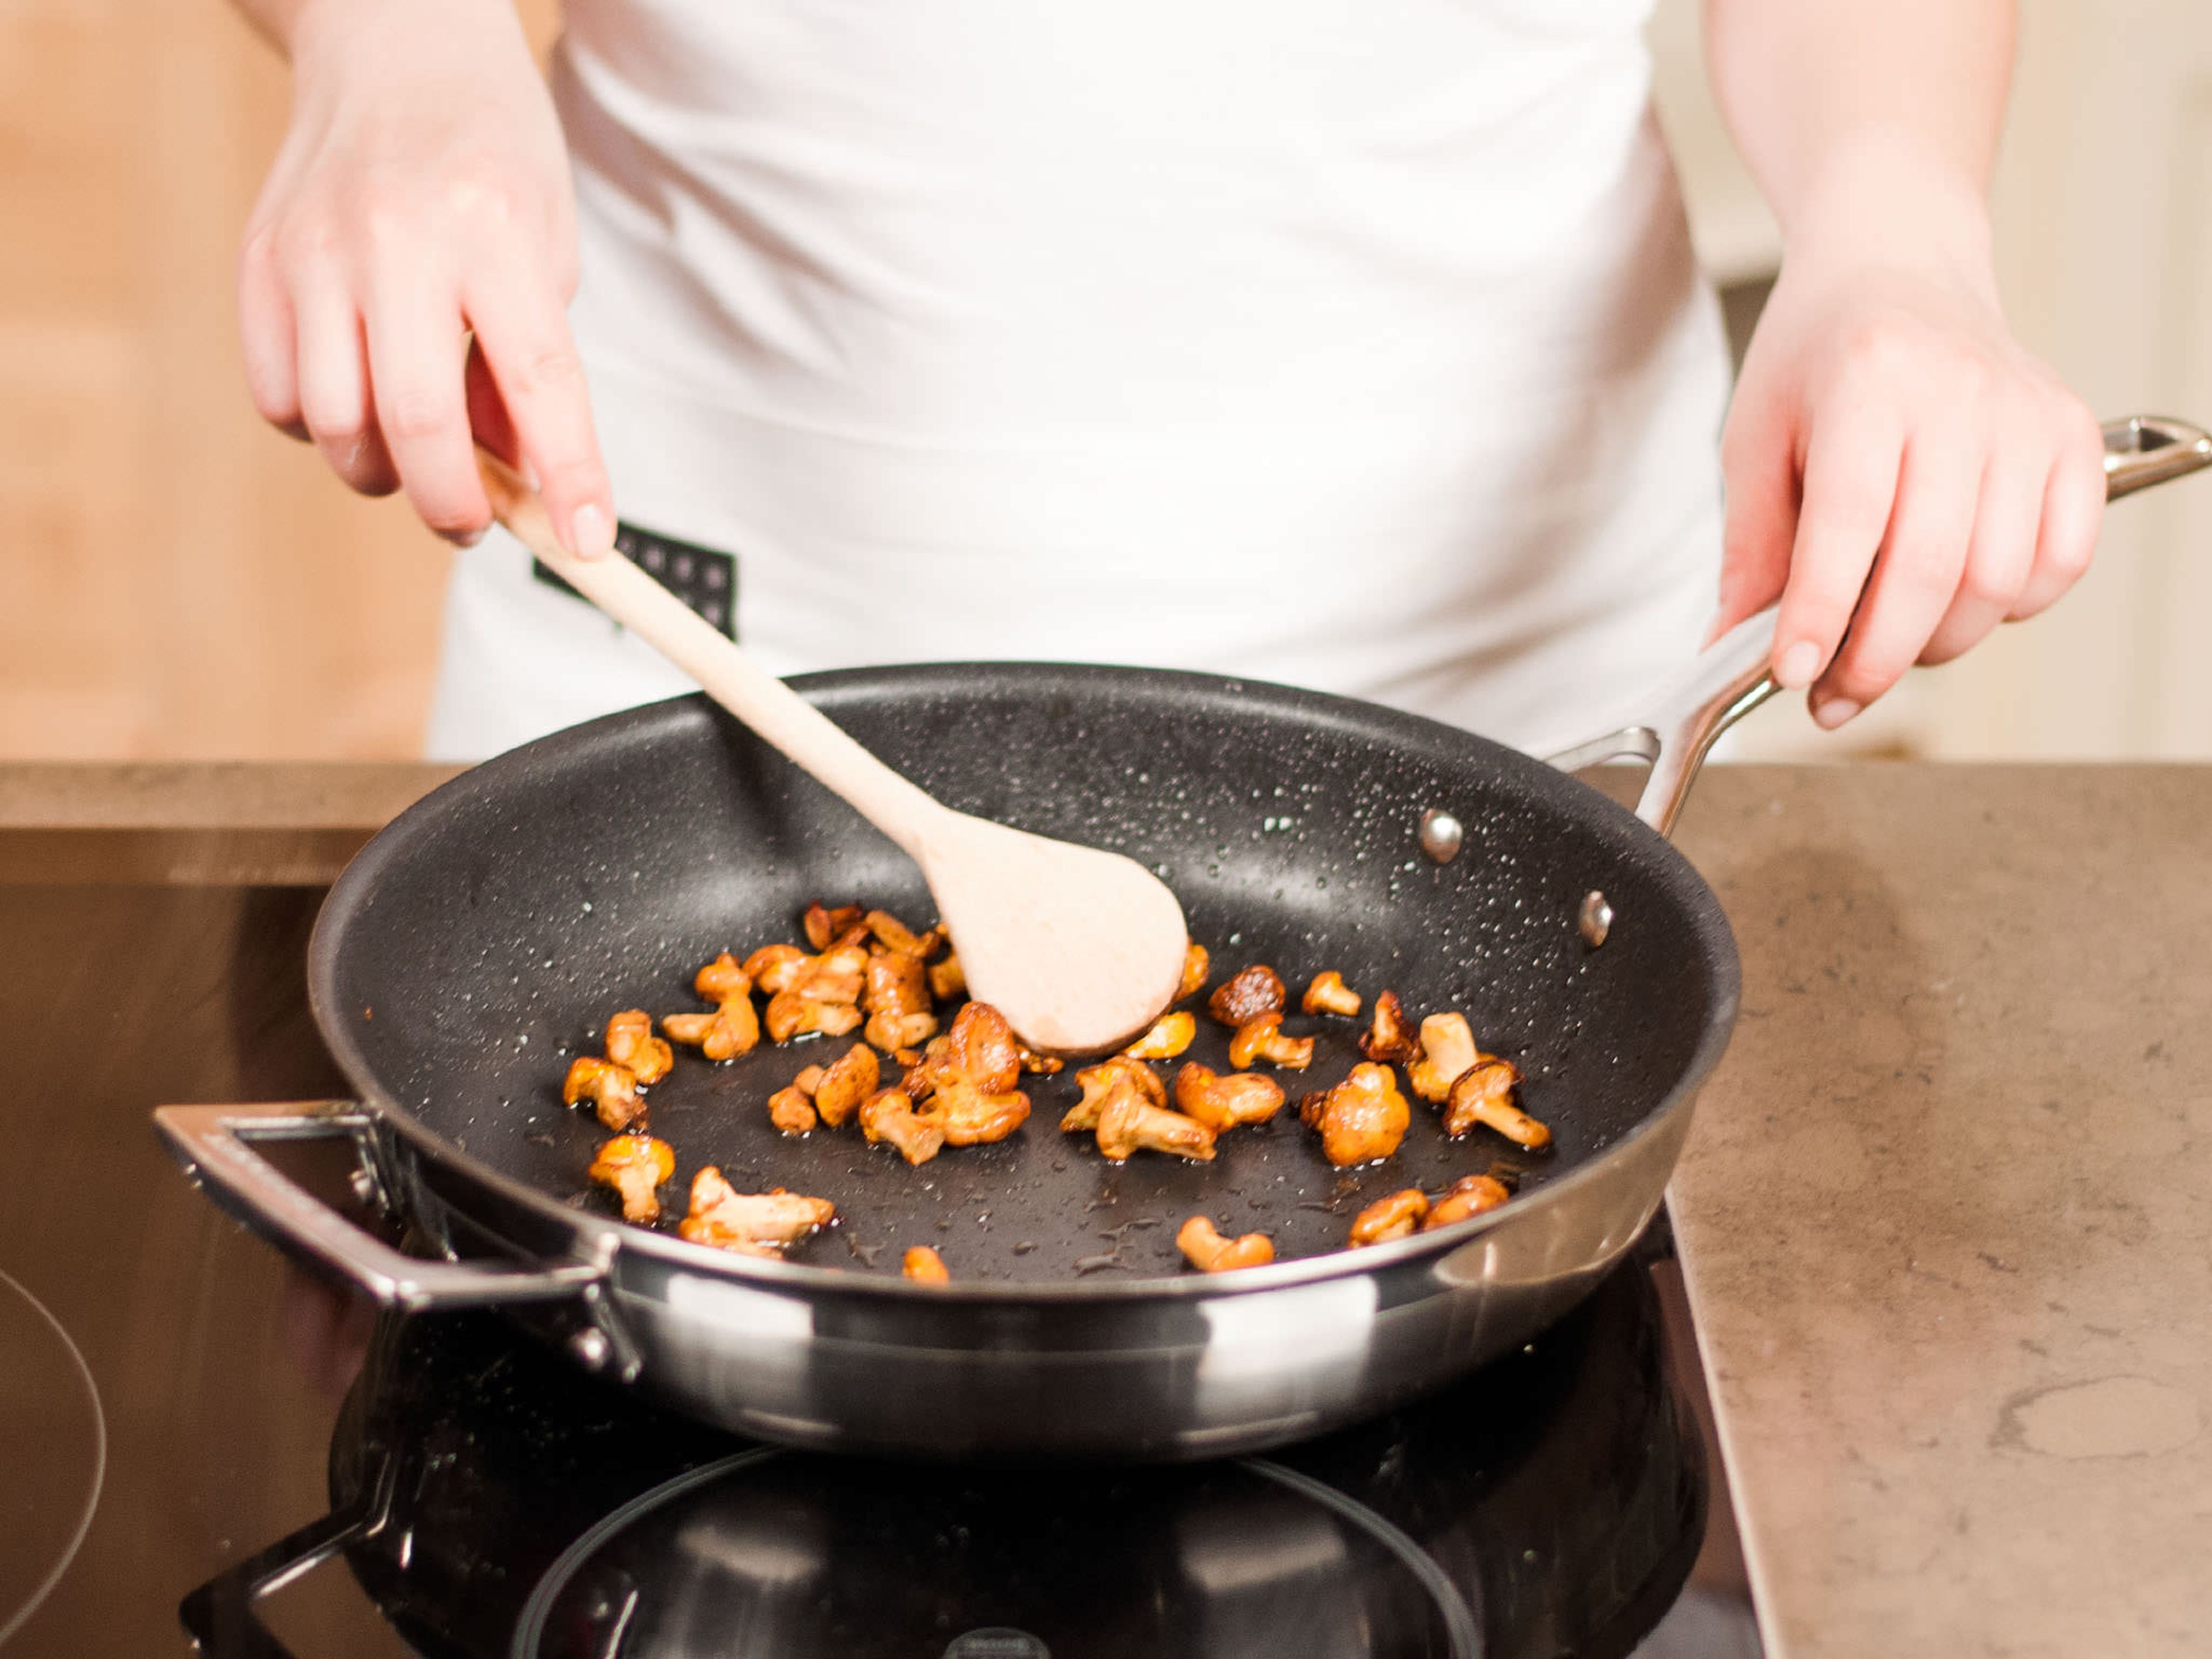 Fry mushrooms in a hot frying pan for approx. 2 – 4 min. until tender. Leave to cool.